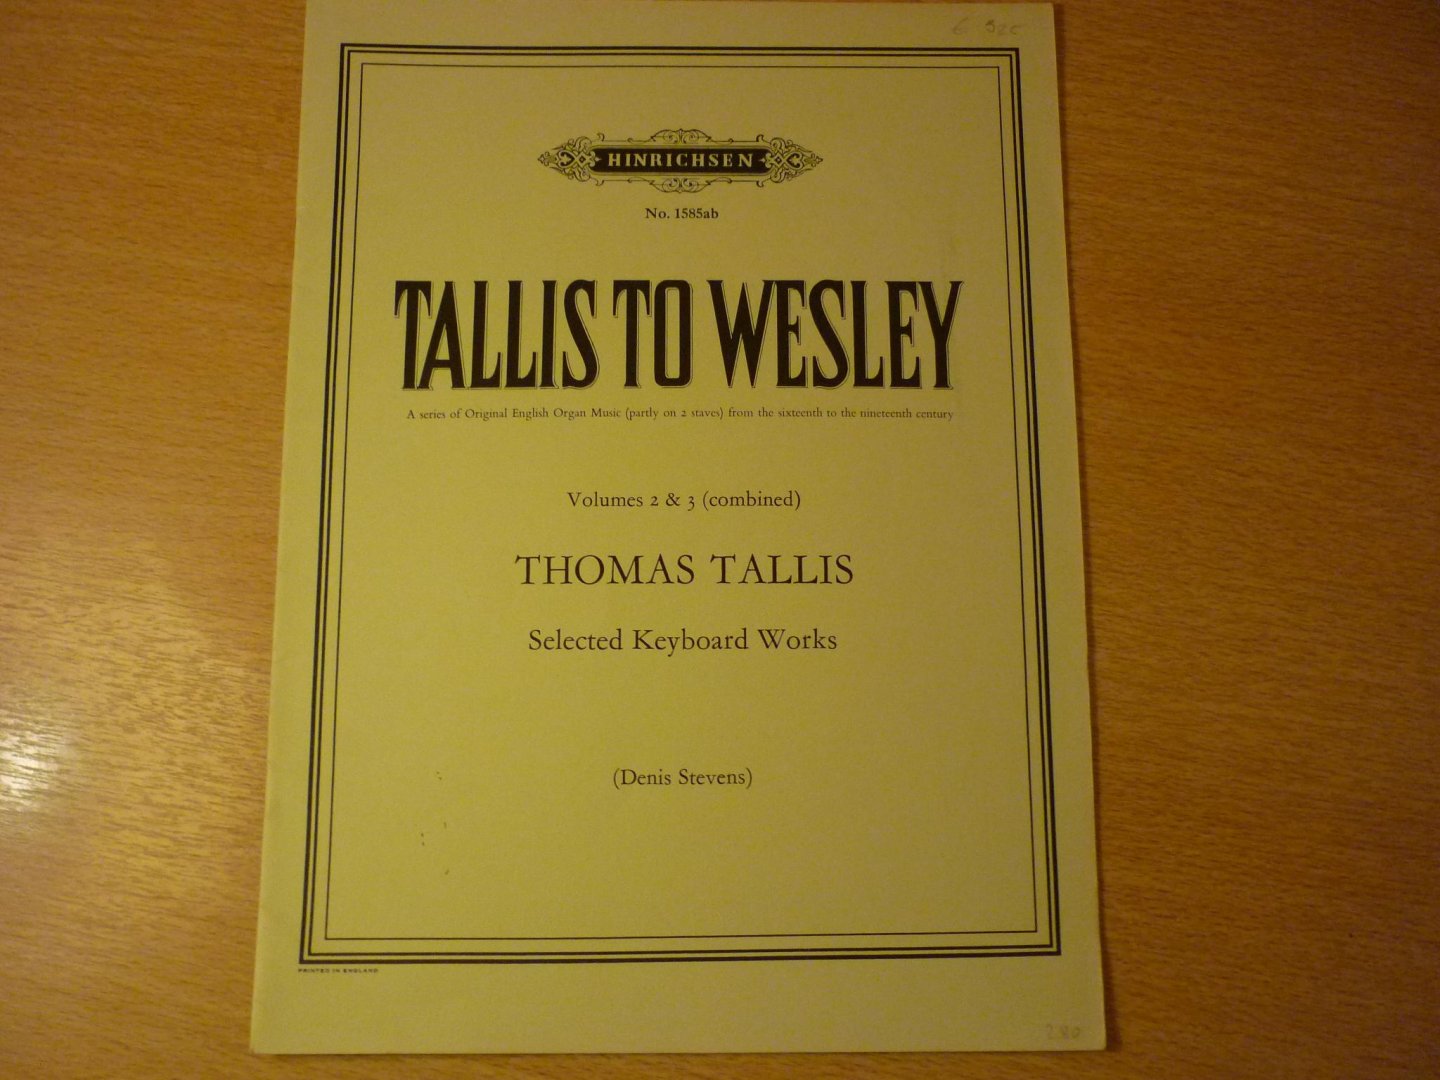 Tallis; Thomas (1505 - 1585) - Tallis to Wesley; Volume 2 & 3 (combined);  A new series of Original English Organ music partly on two staves from the sixteenth to the nineteenth century; Thomas Tallis; Selected Keyboard Works (Denis Stevens)